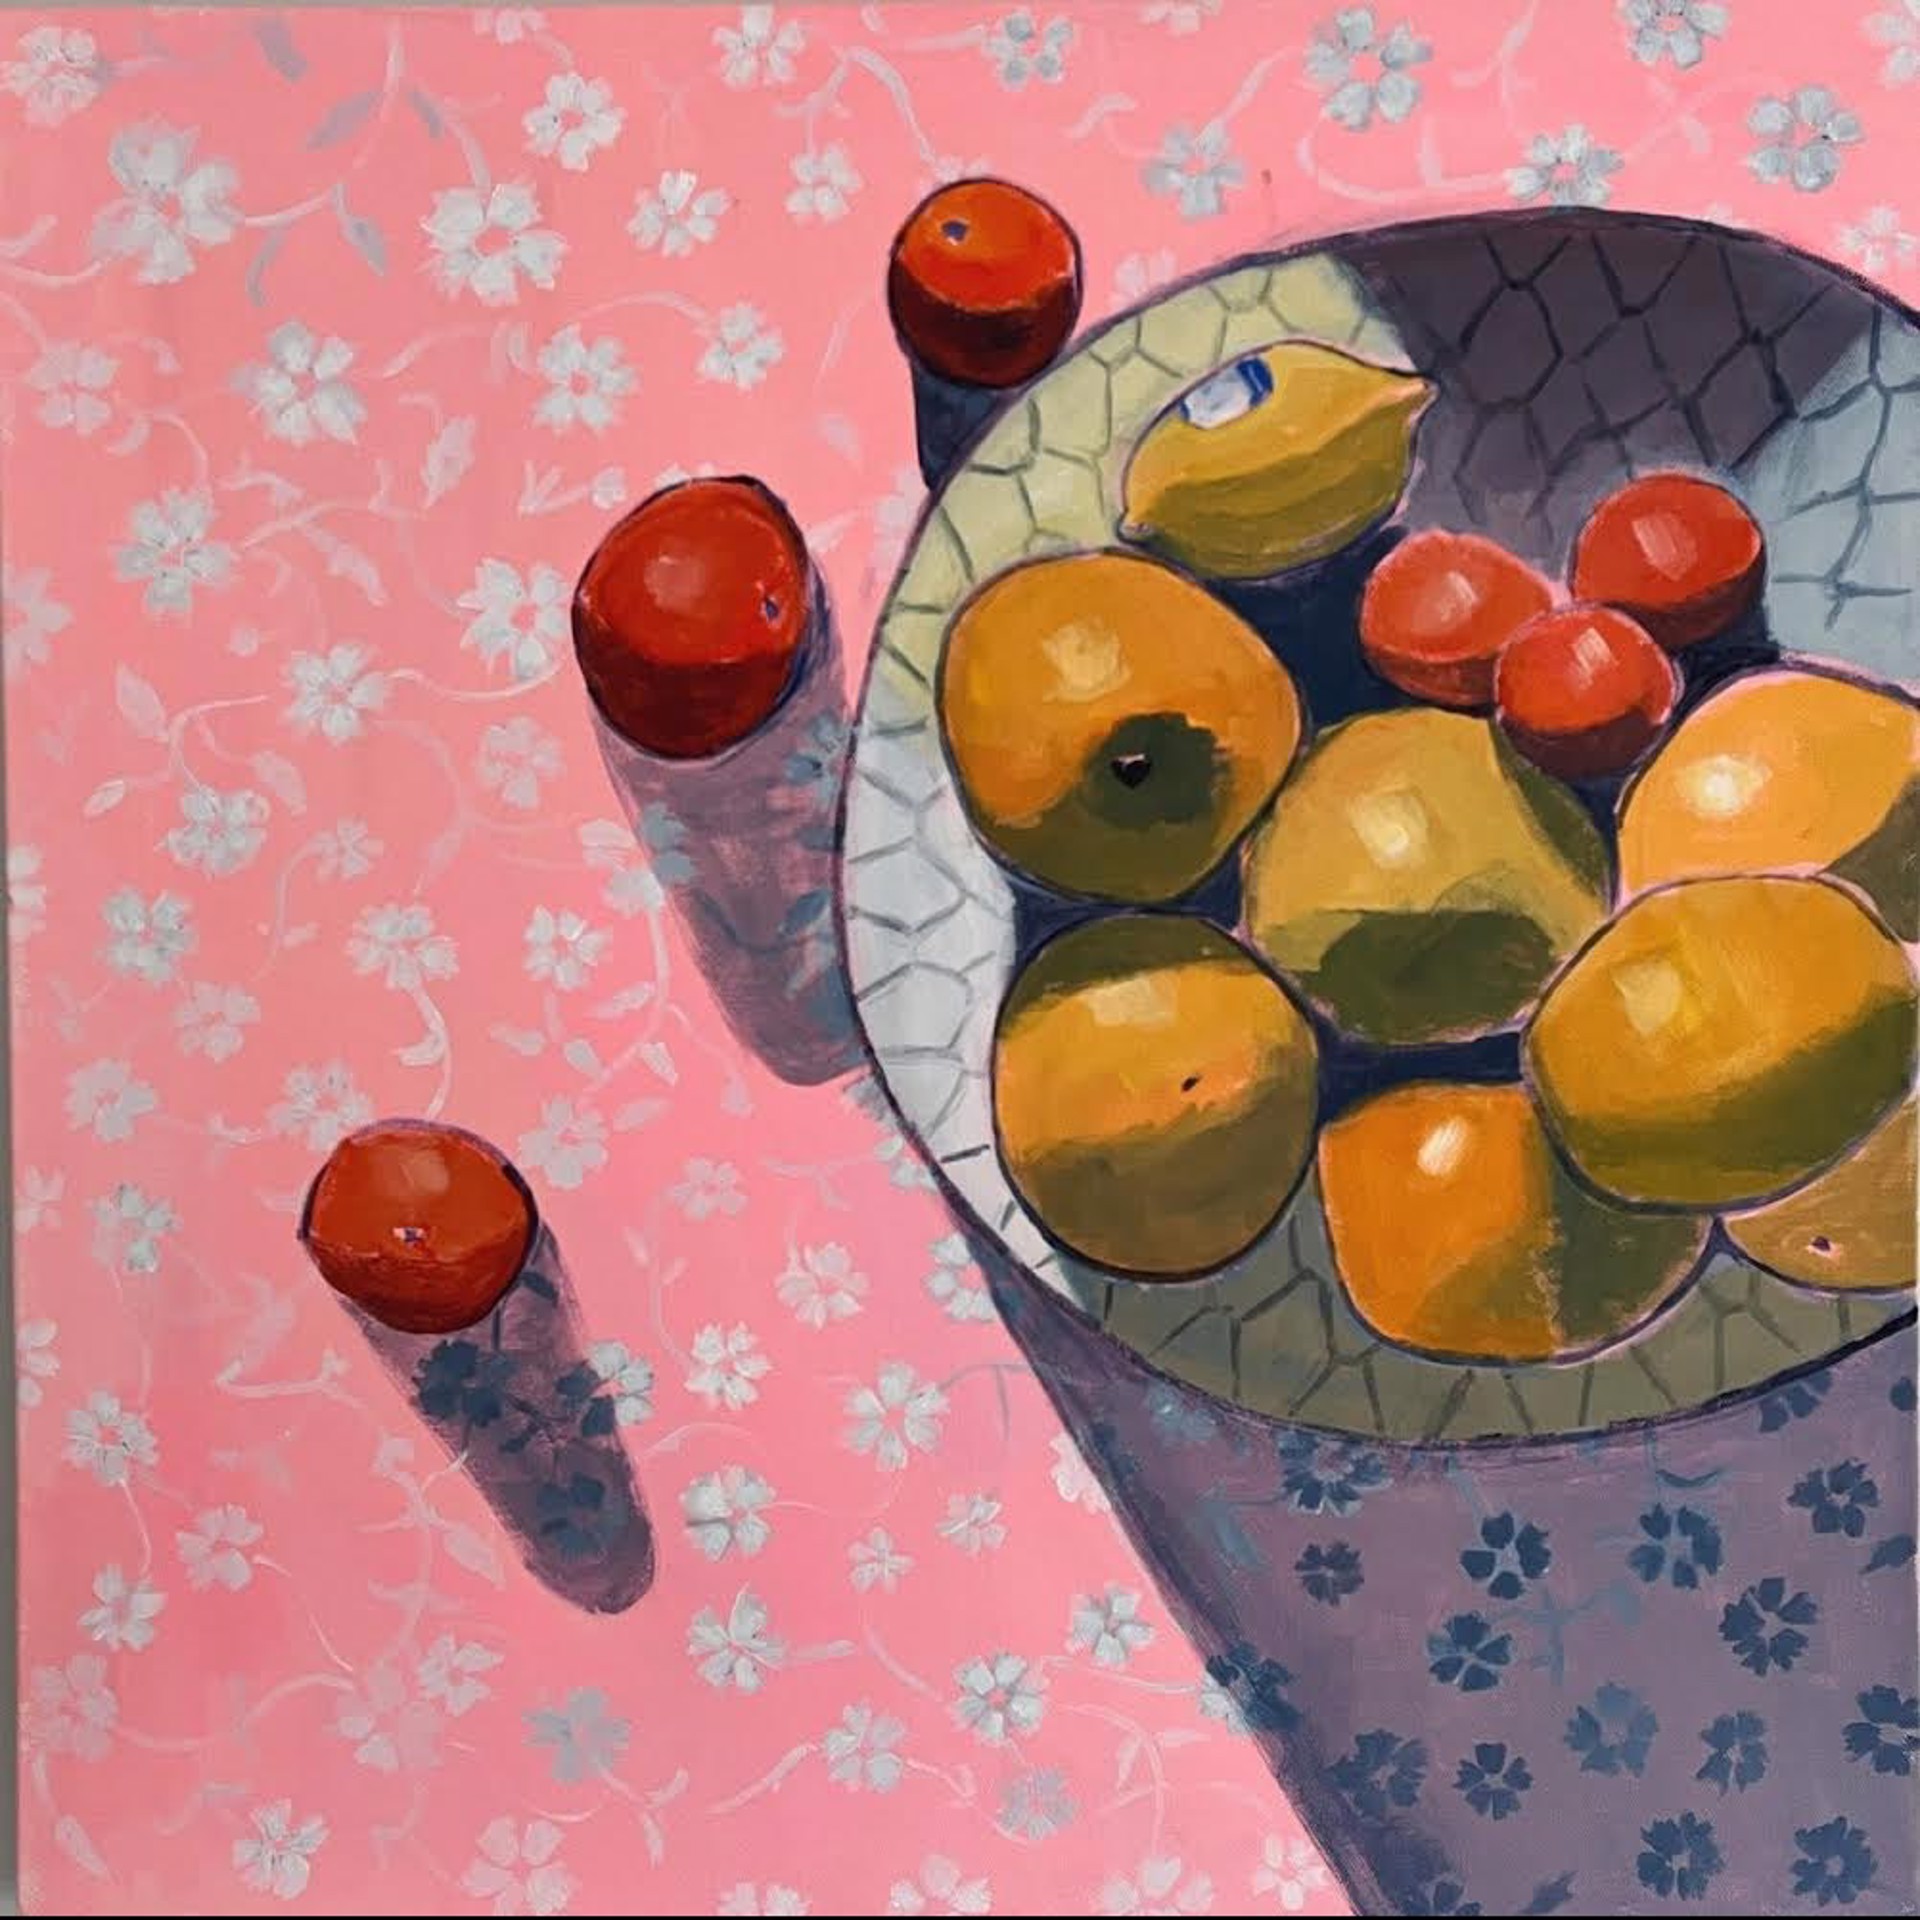 Fruit There It Is by Maggie Stickney